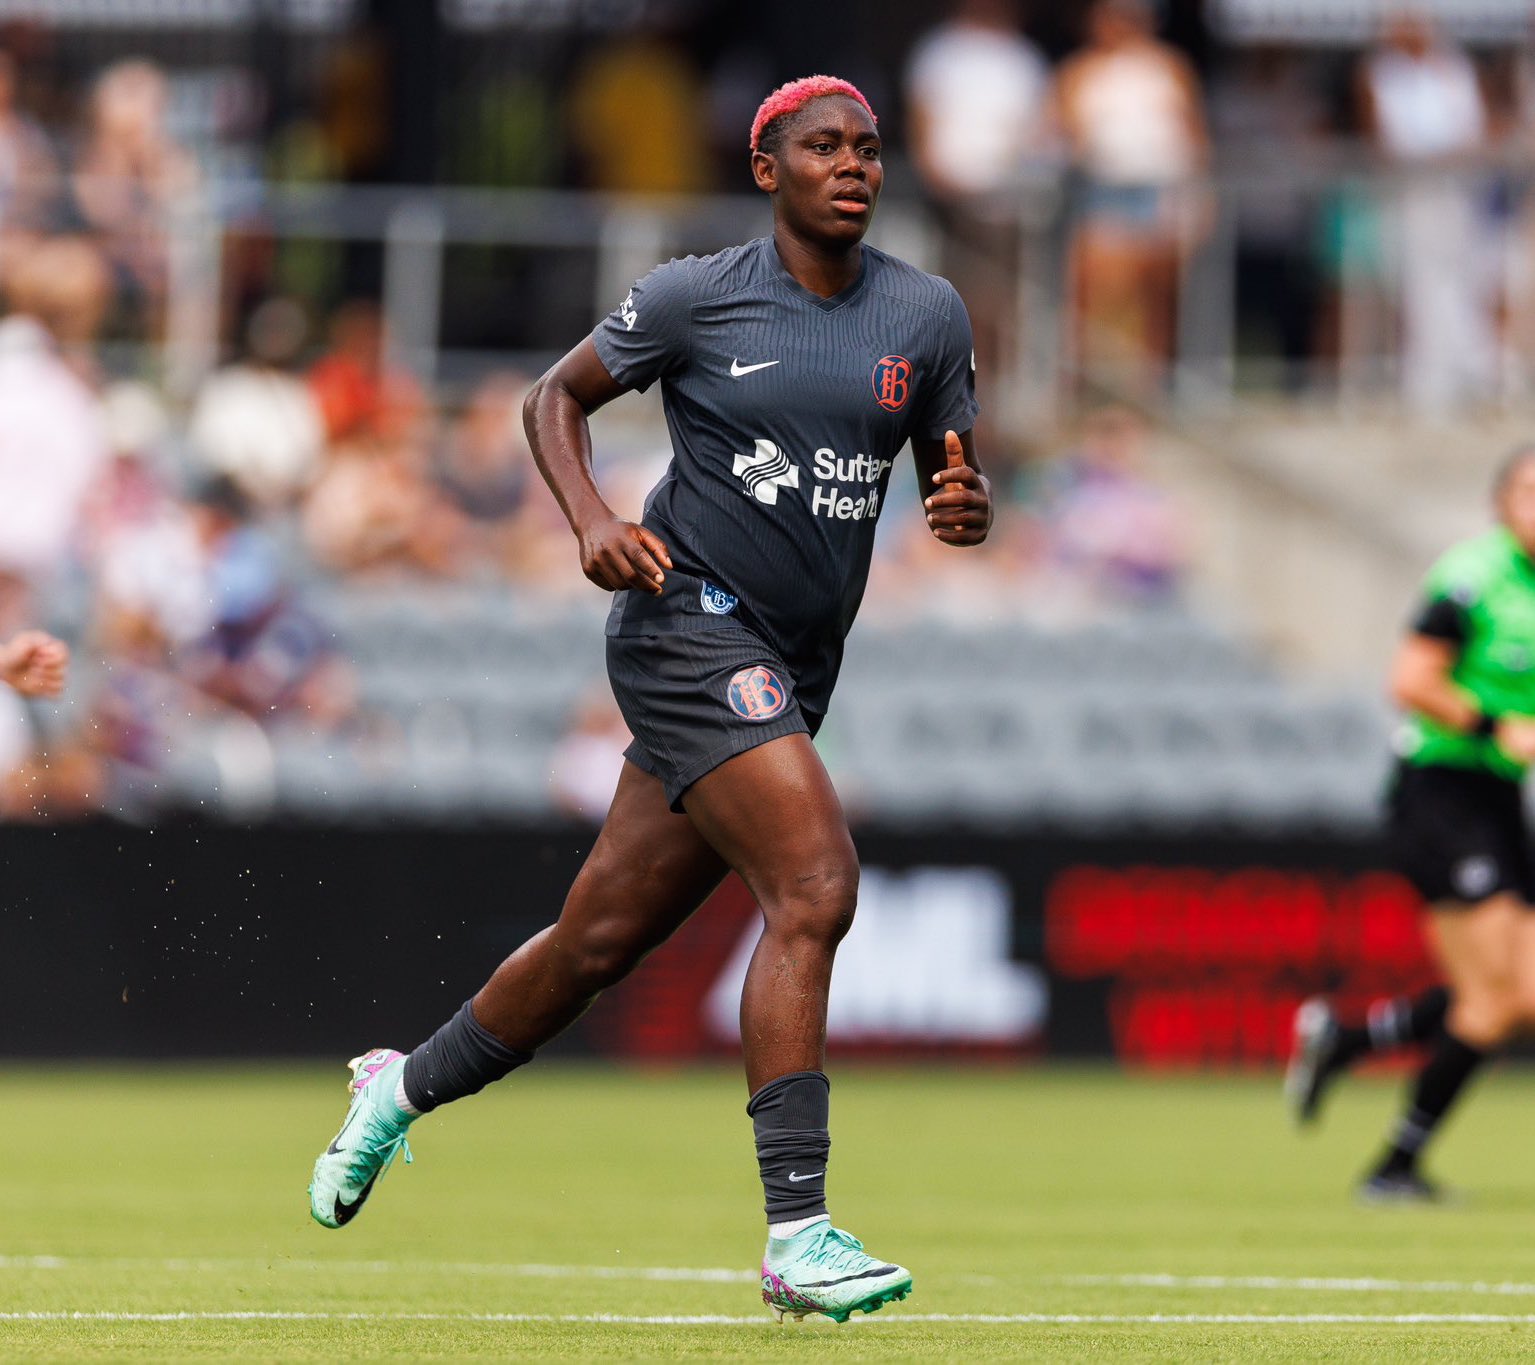 UWSL: Oshoala makes history in Bay FC’s win over Racing Louisville